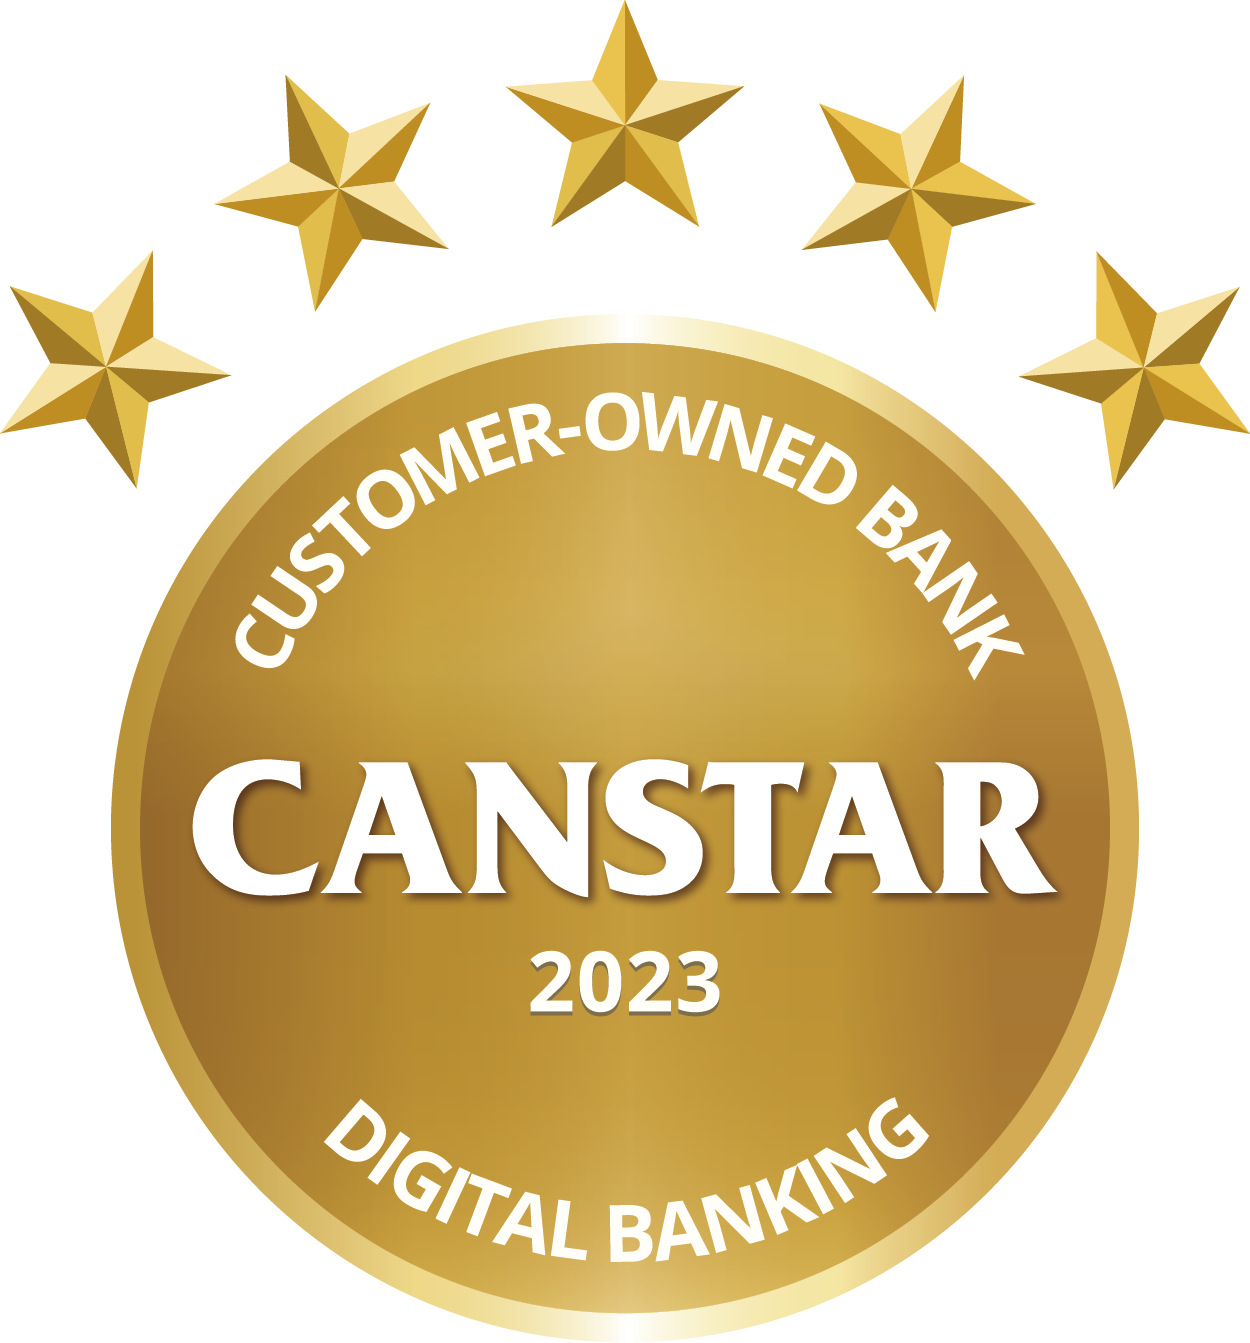 Customer Owned Bank of the Year - Digital Banking Award in 2022